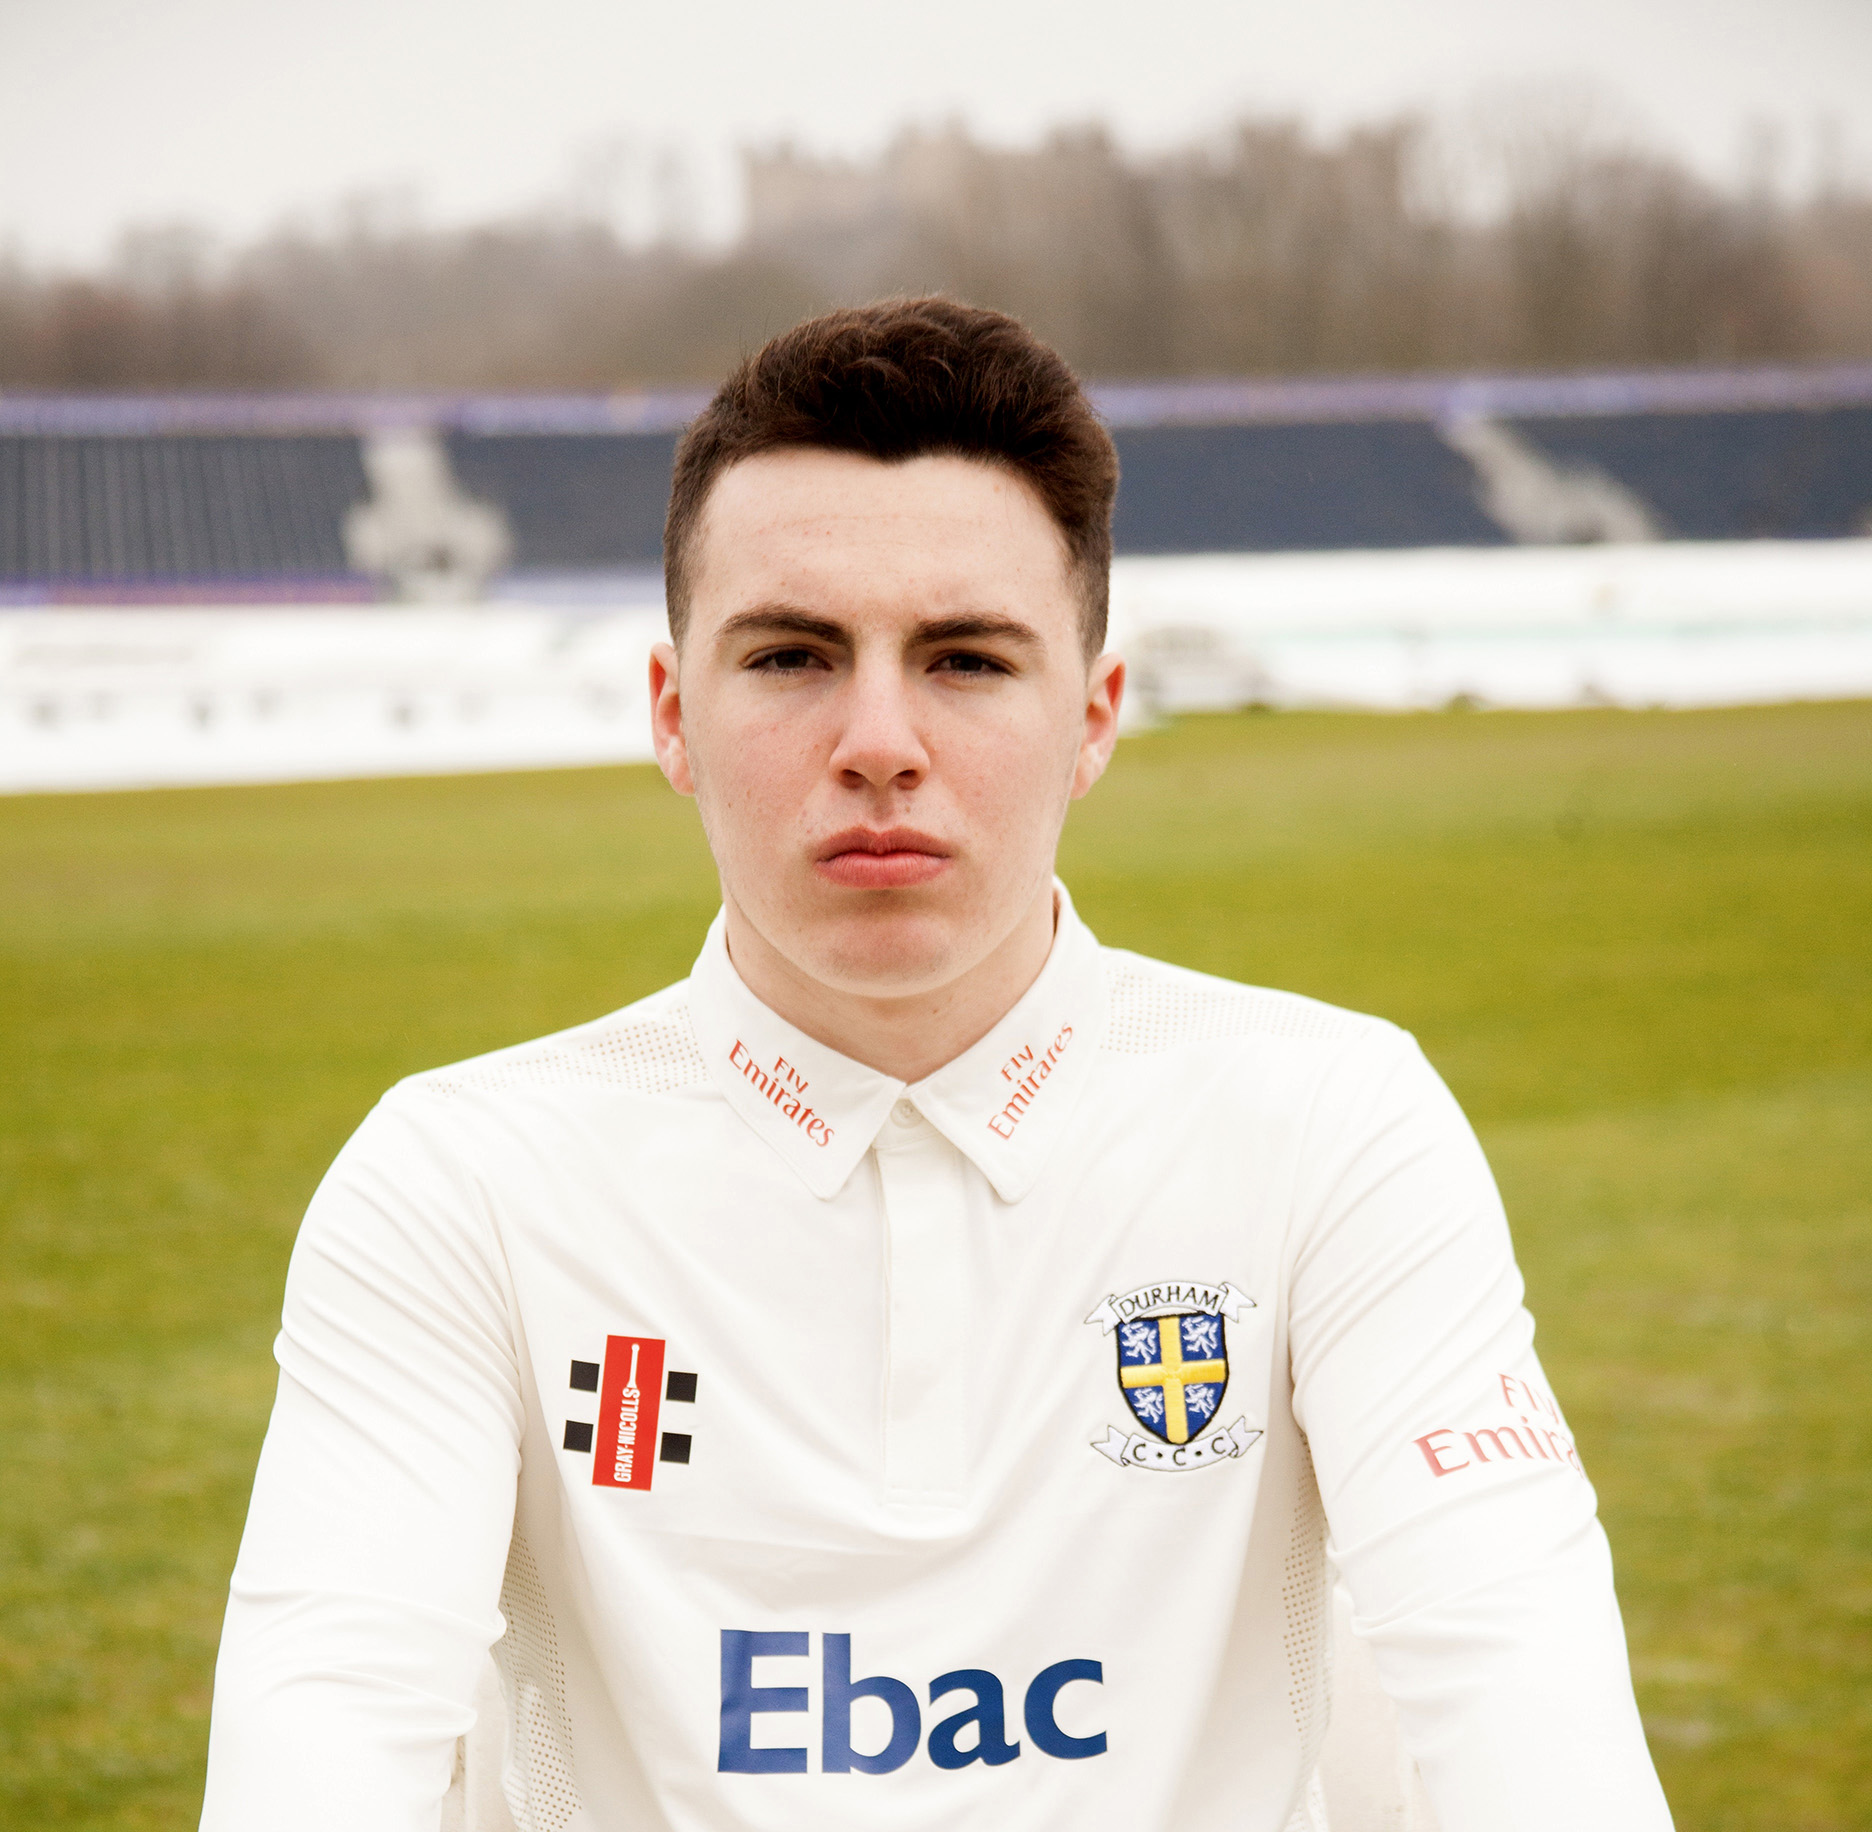 16 year old Luke Doneathy to captain Benwell Hill first eleven at Chester-le-Street